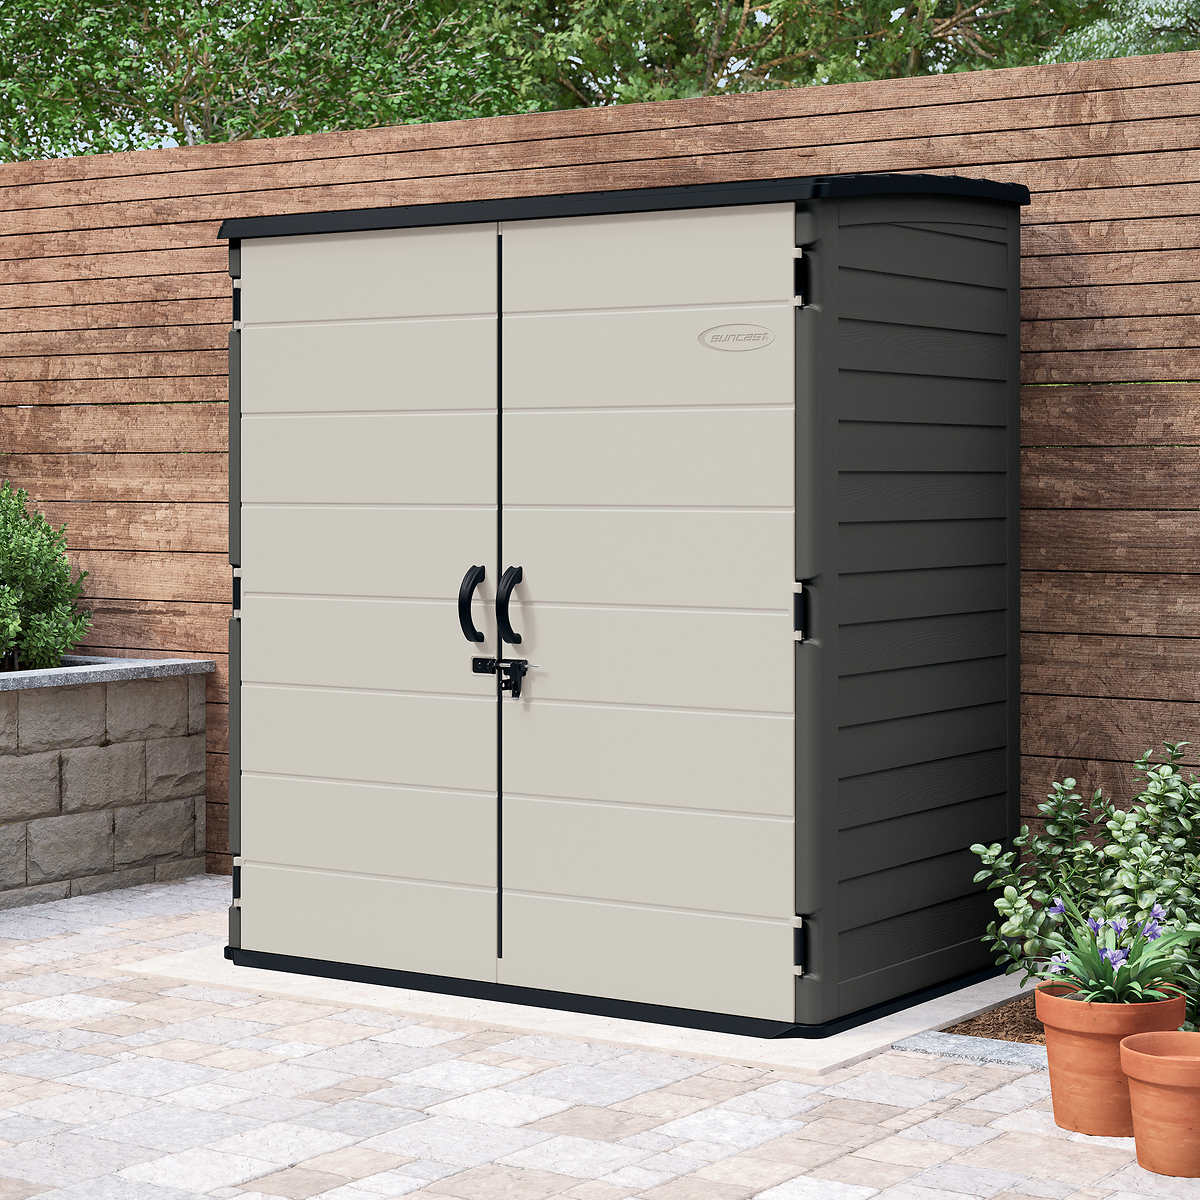 Suncast Extra Large Vertical Shed $399 at Costco